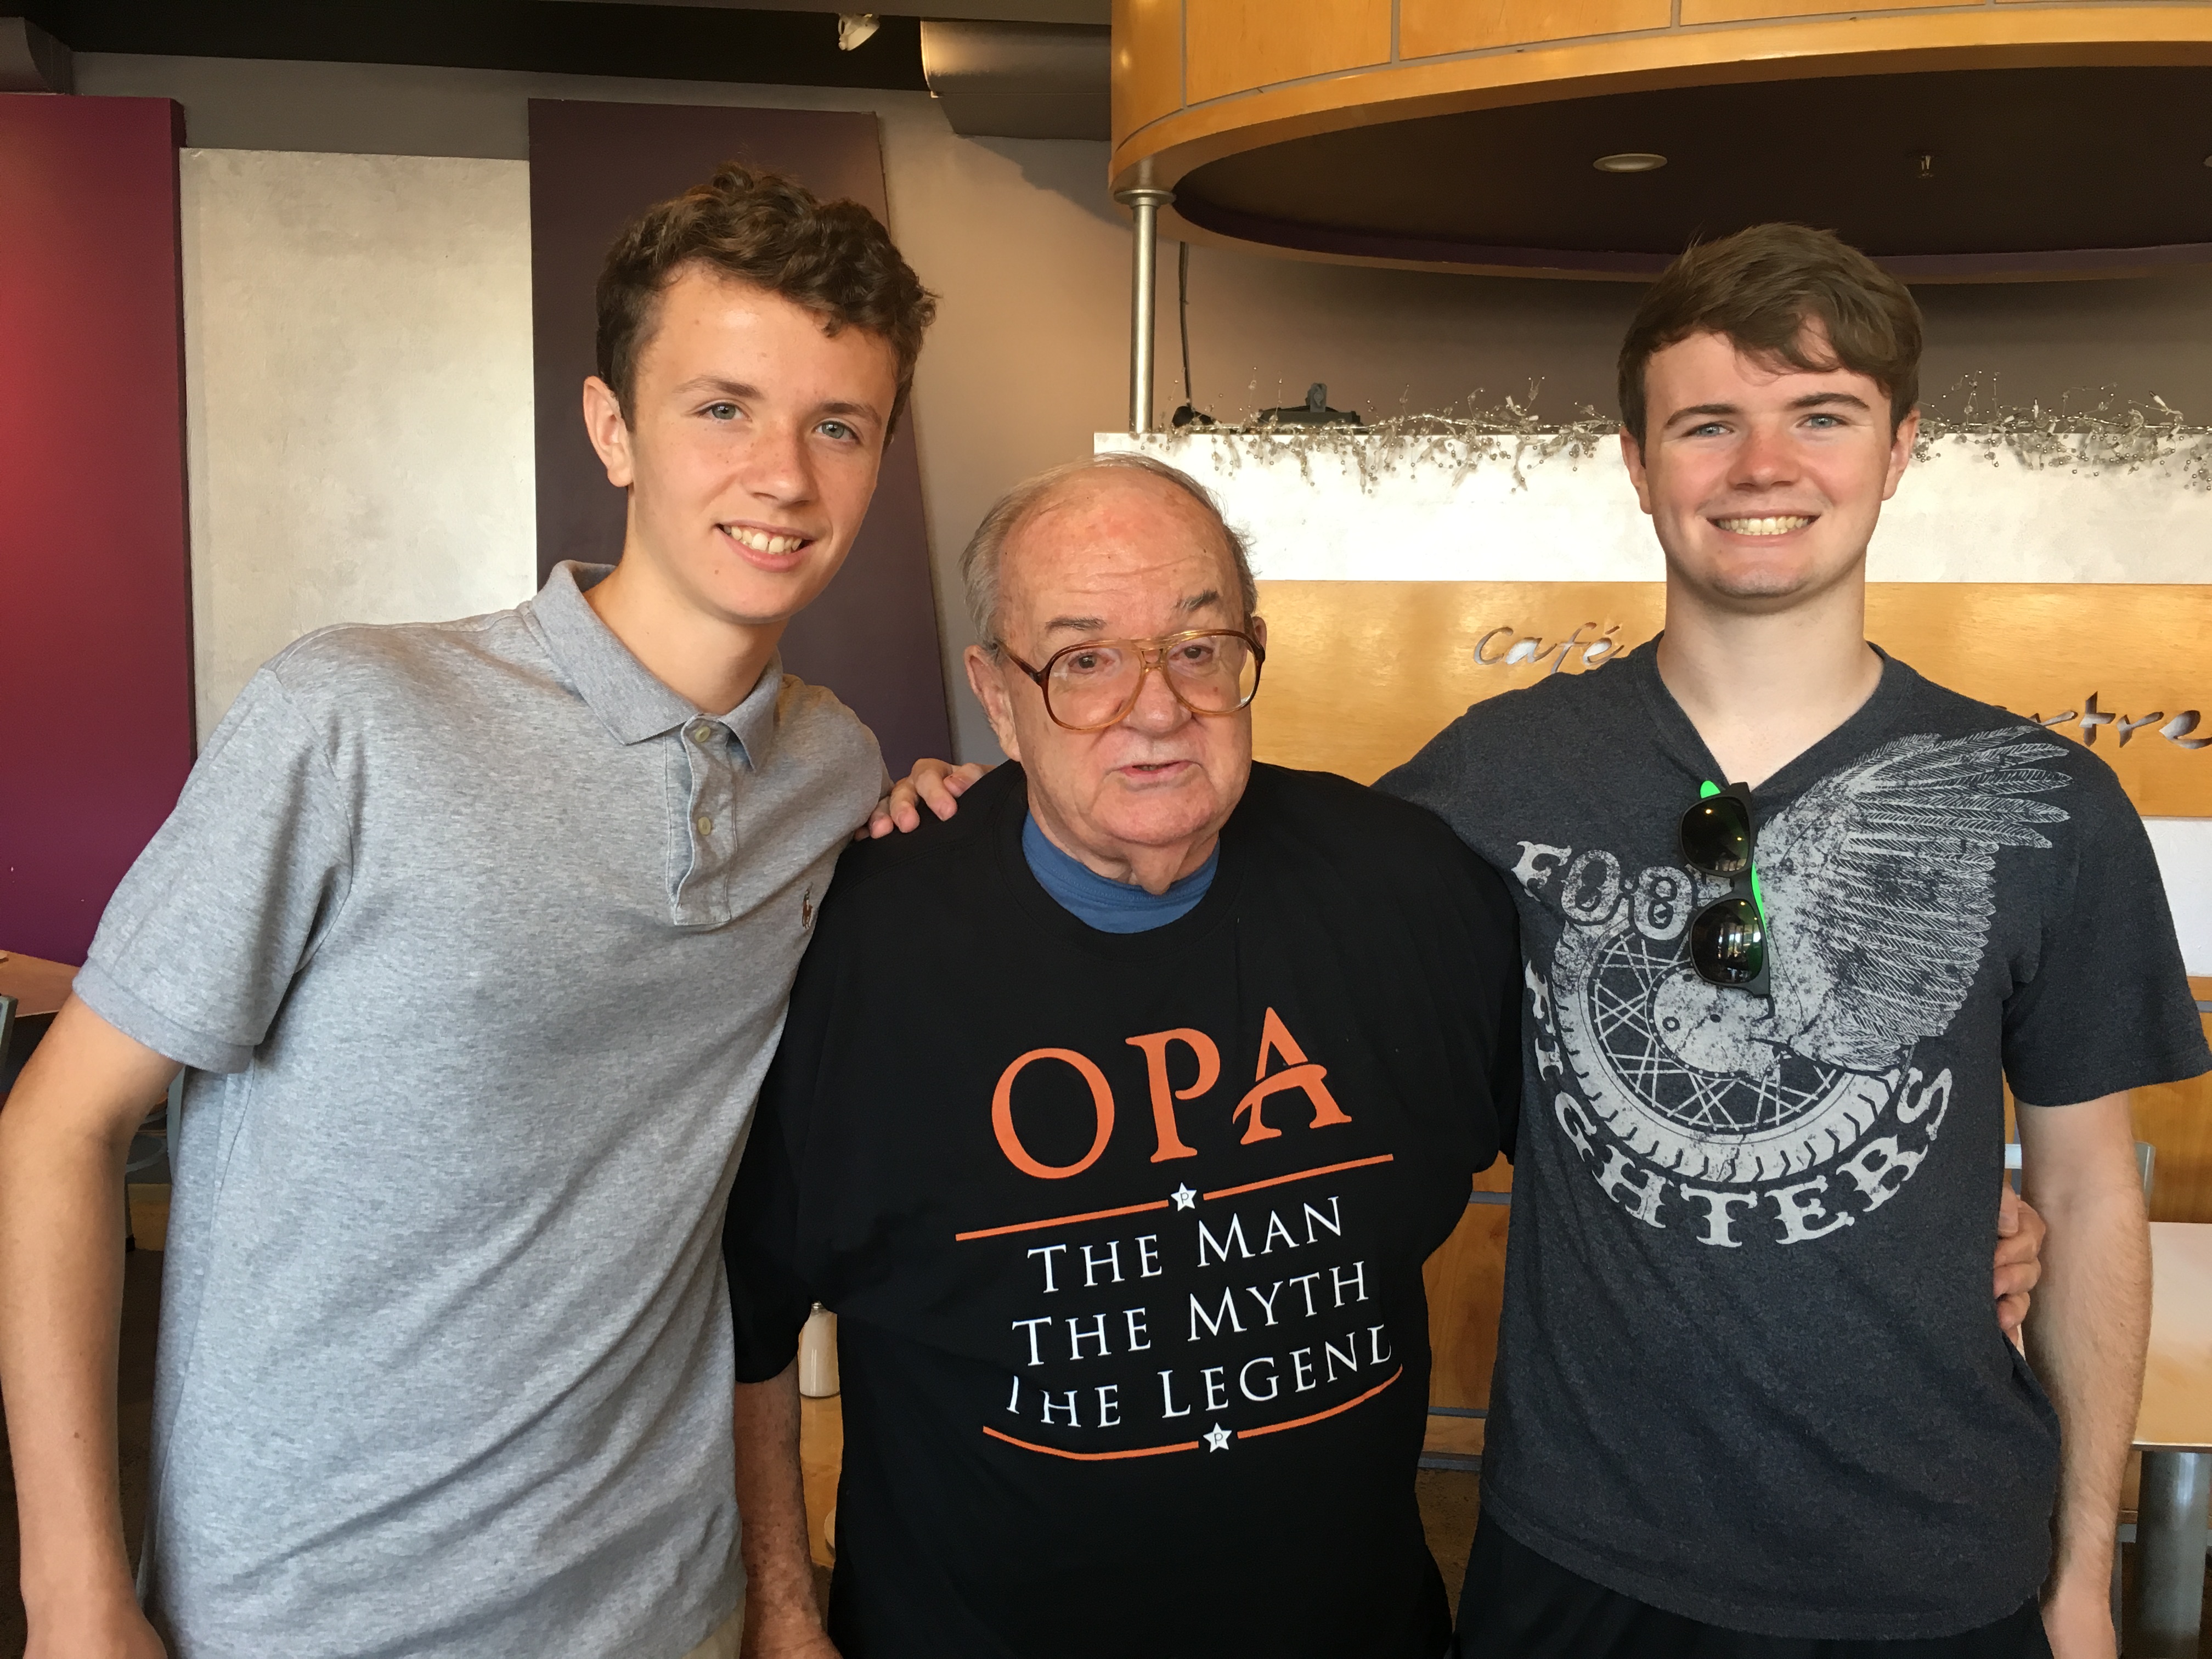 Opa is the man, they myth, the legend.